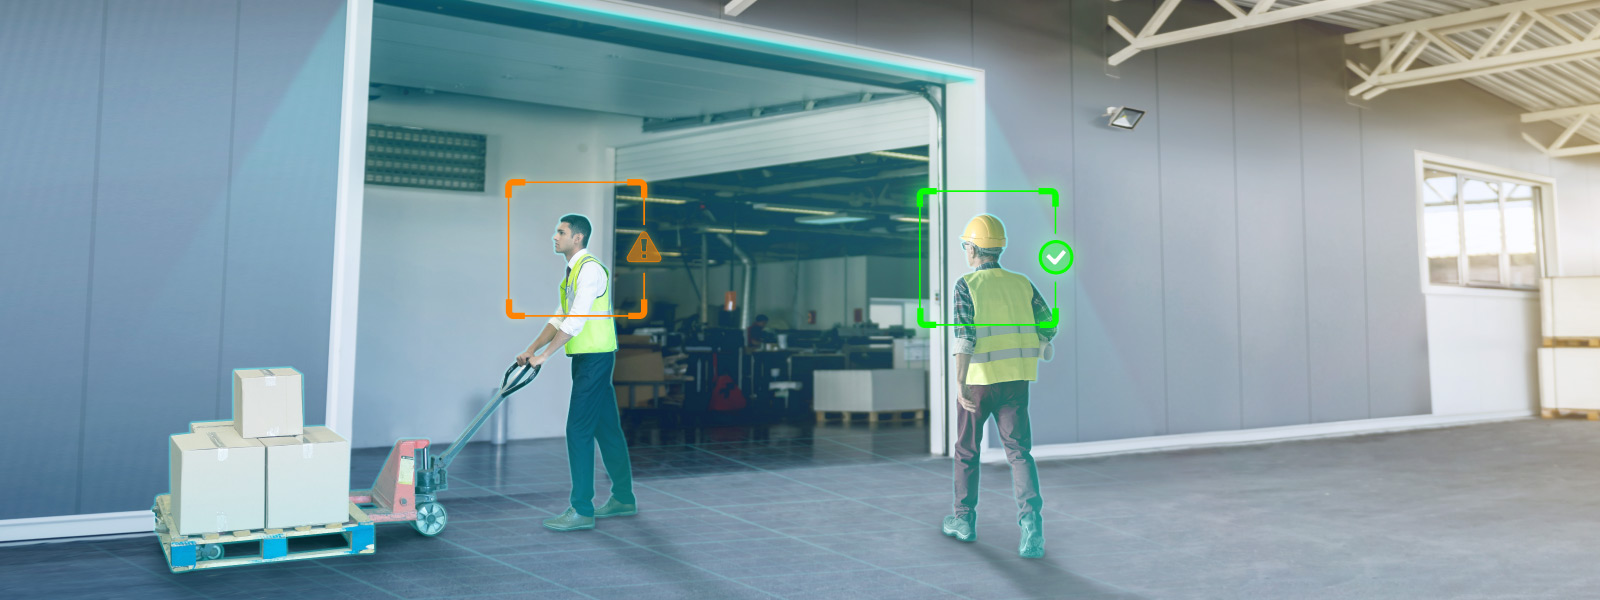 Using AI for helmet detection to boost warehouse and factory safety